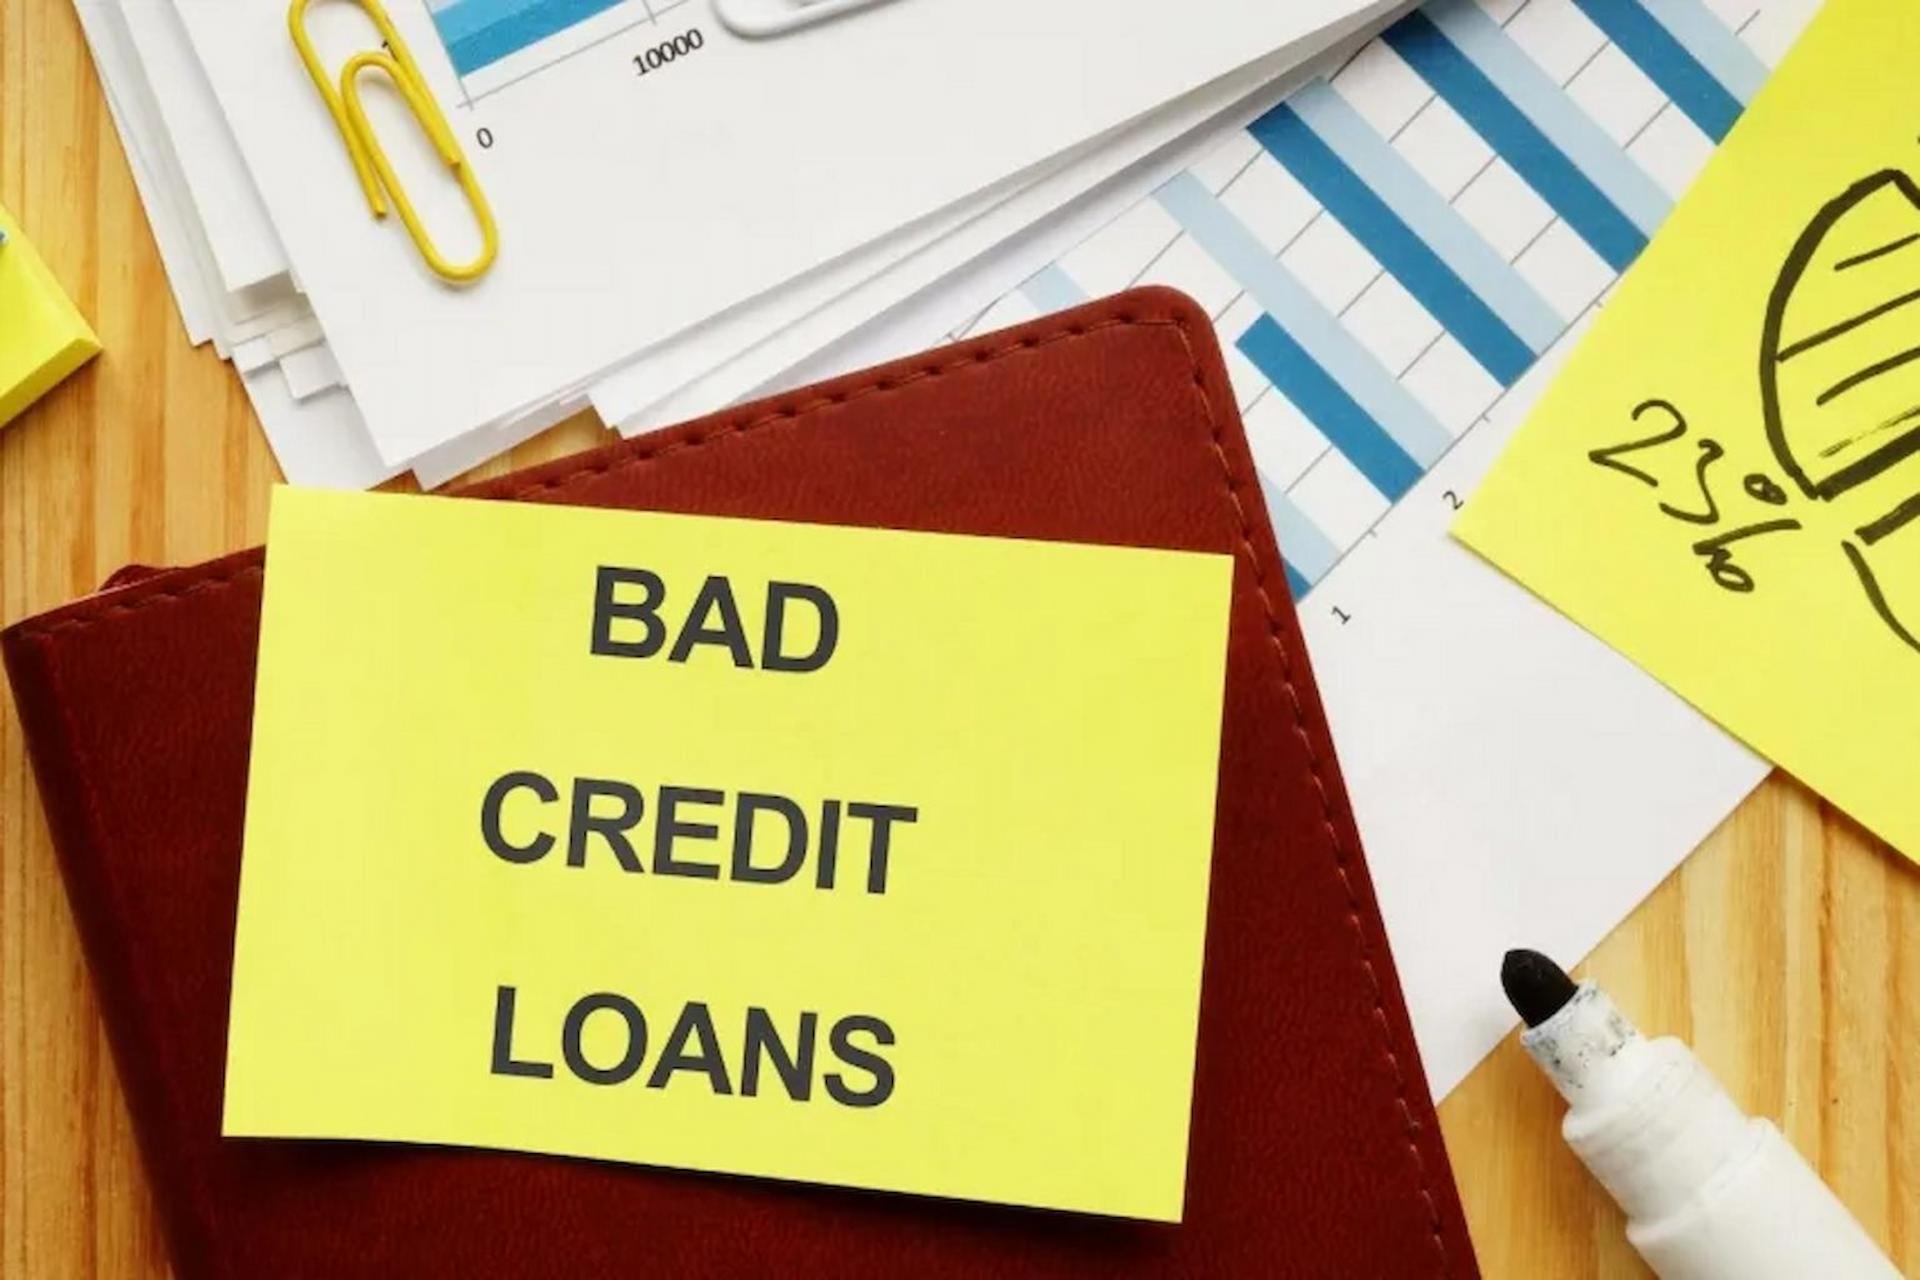 Tips for Finding Loans with Bad Credit When You Need Them